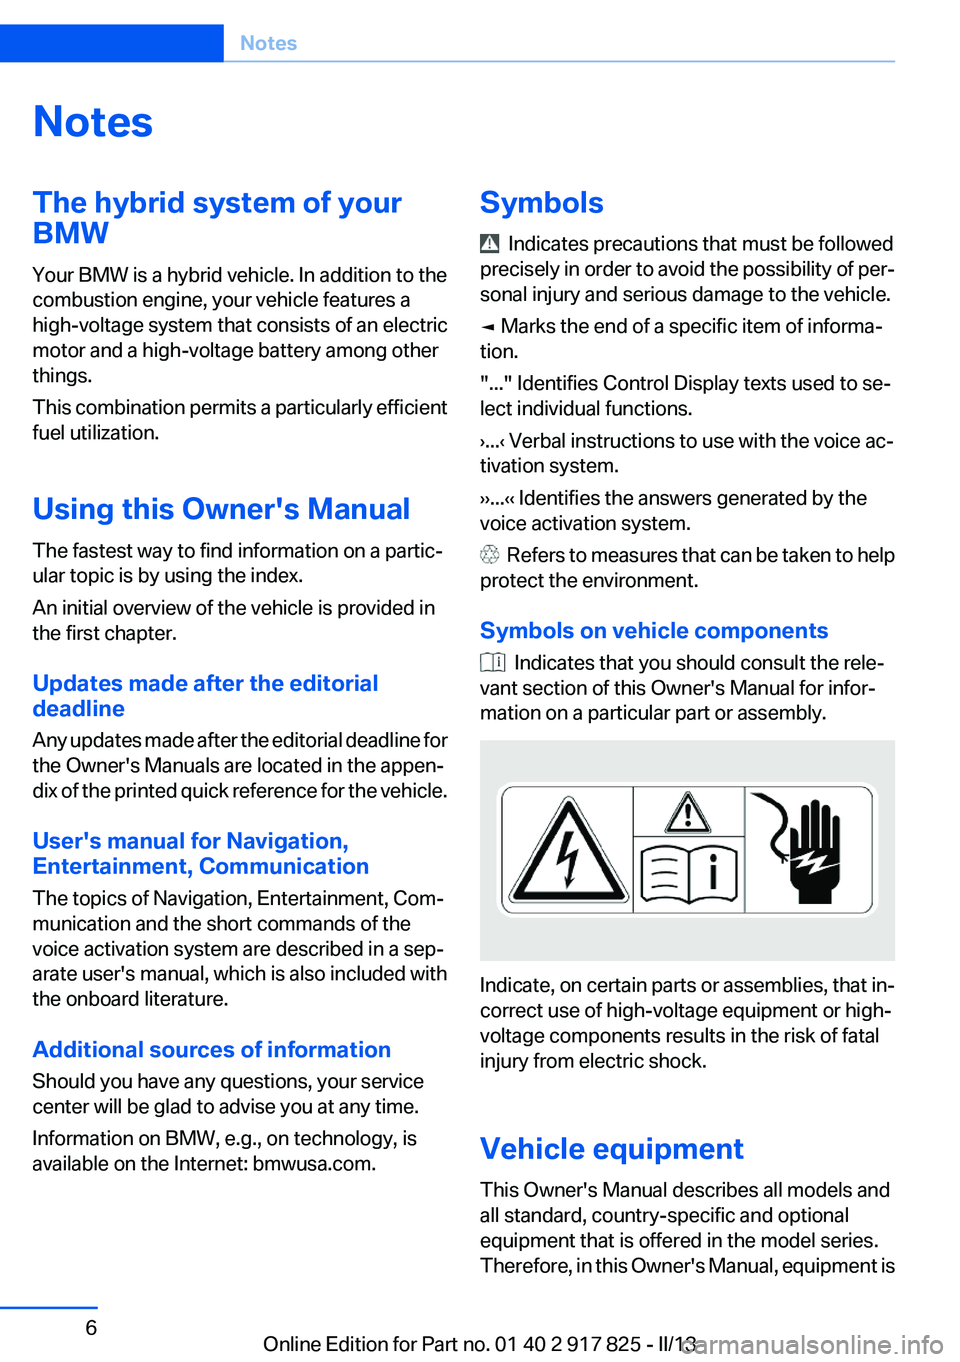 BMW ACTIVEHYBRID3 2013  Owners Manual NotesThe hybrid system of your
BMW
Your BMW is a hybrid vehicle. In addition to the
combustion engine, your vehicle features a
high-voltage system that consists of an electric
motor and a high-voltage